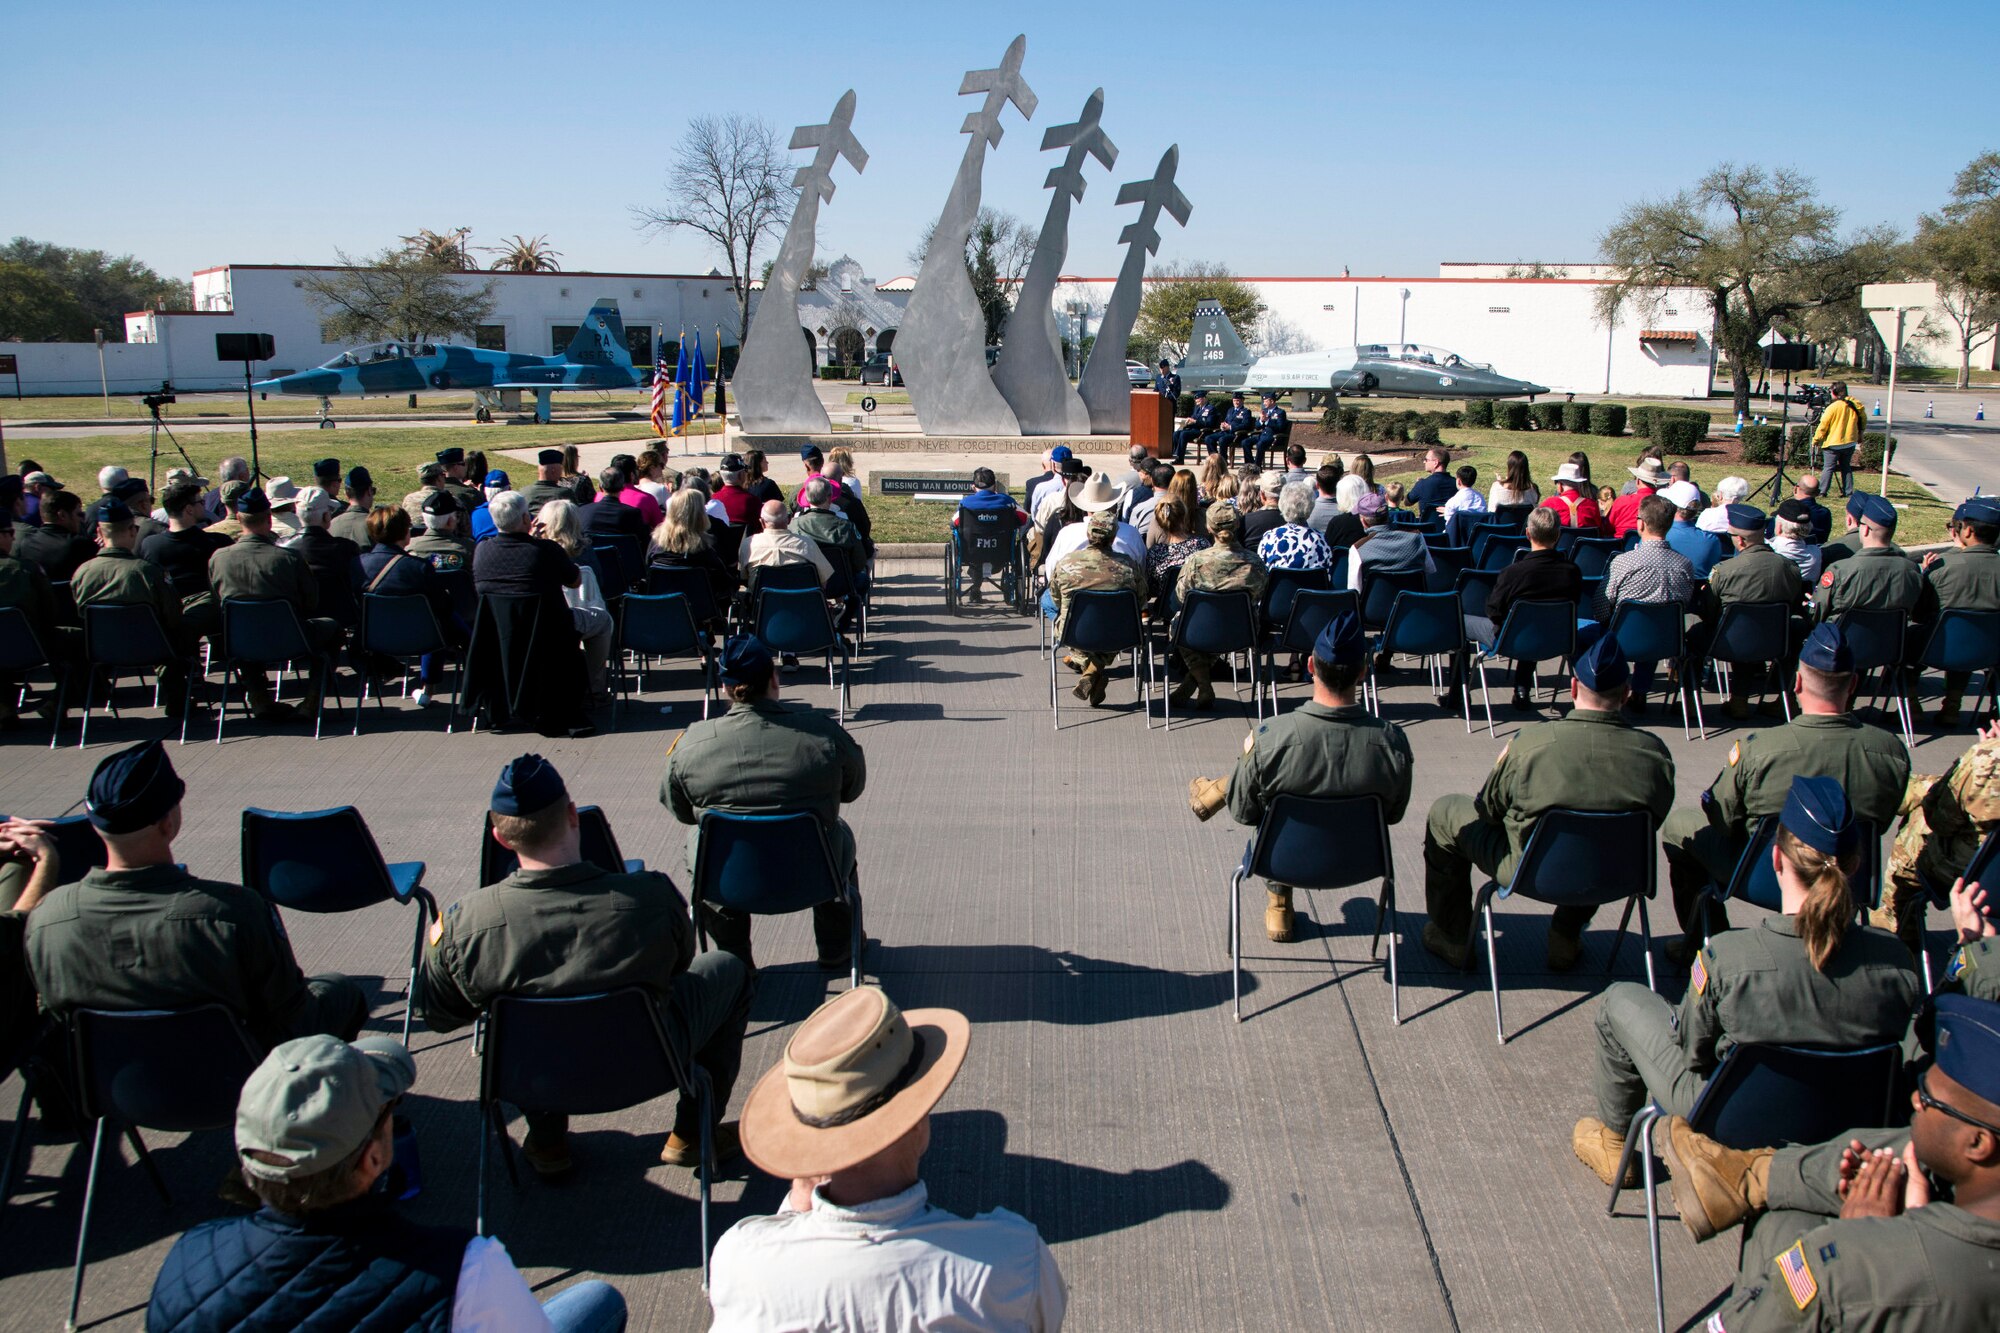 Vietnam POWs/MIAs honored during 48th Freedom Flyer Reunion